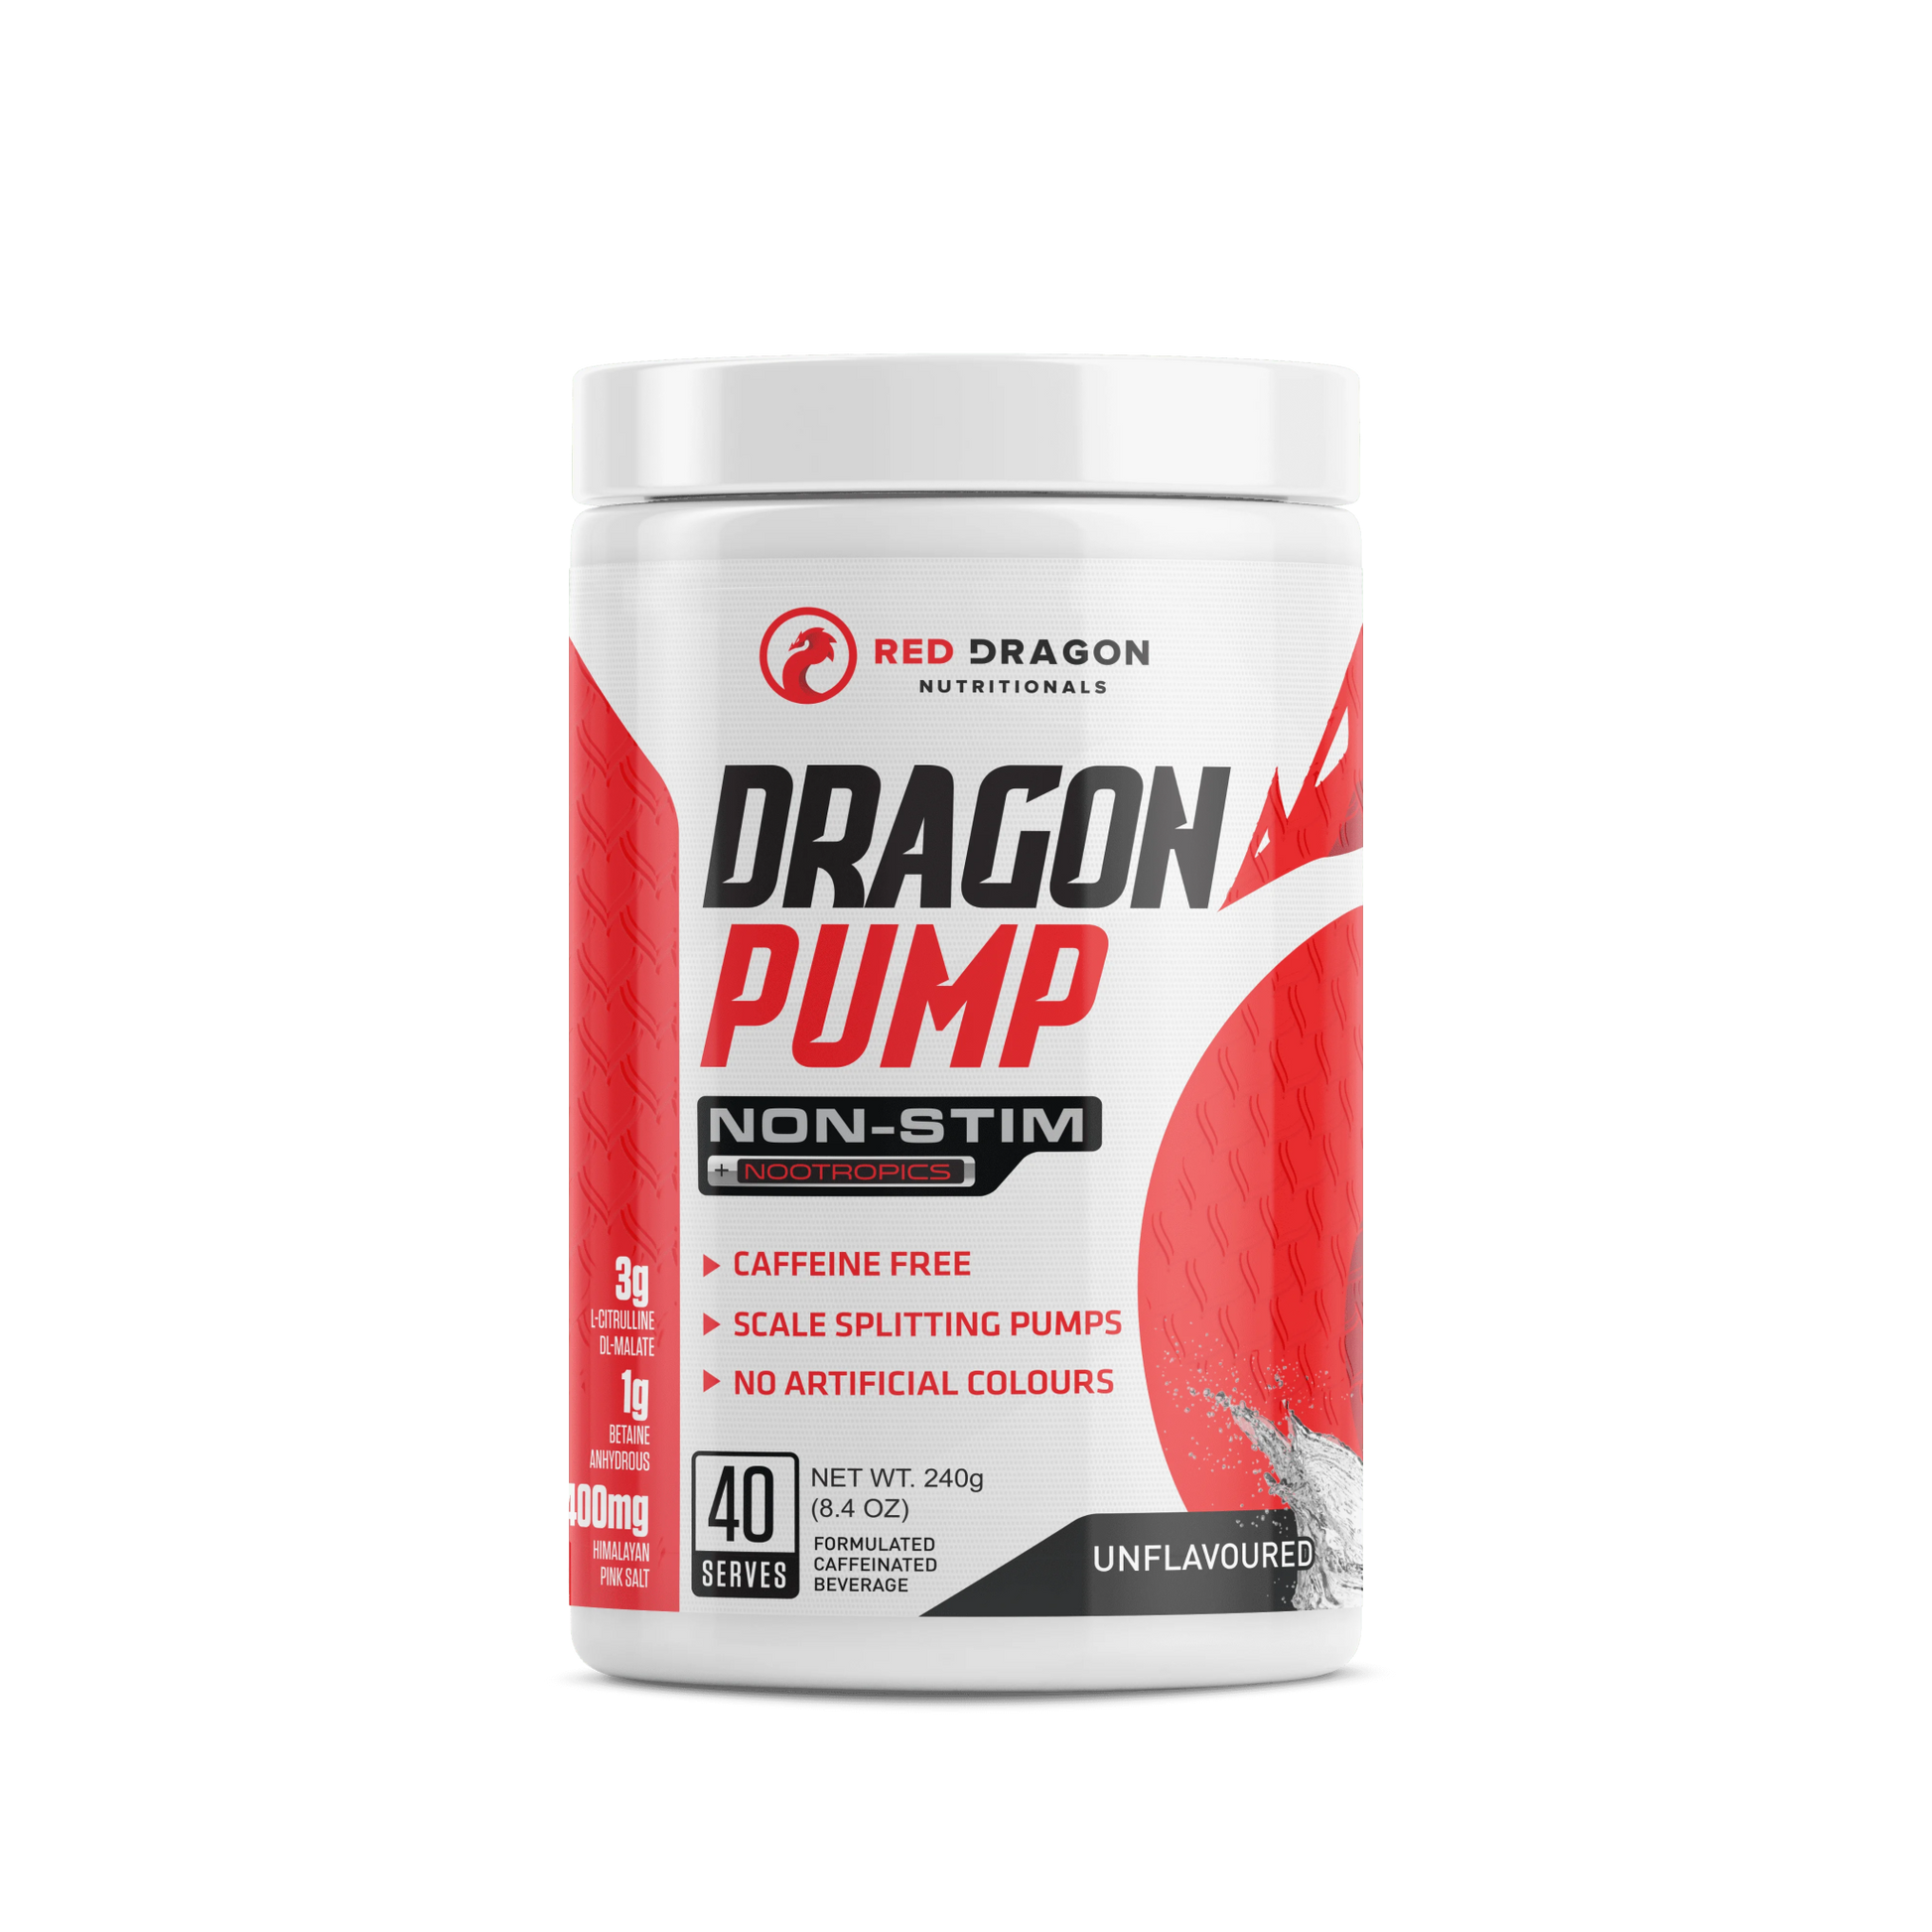 Red Dragon Nutritionals - Dragon Pump Pre-Workout Non-Stim - Supplements - 40 Serves - The Cave Gym